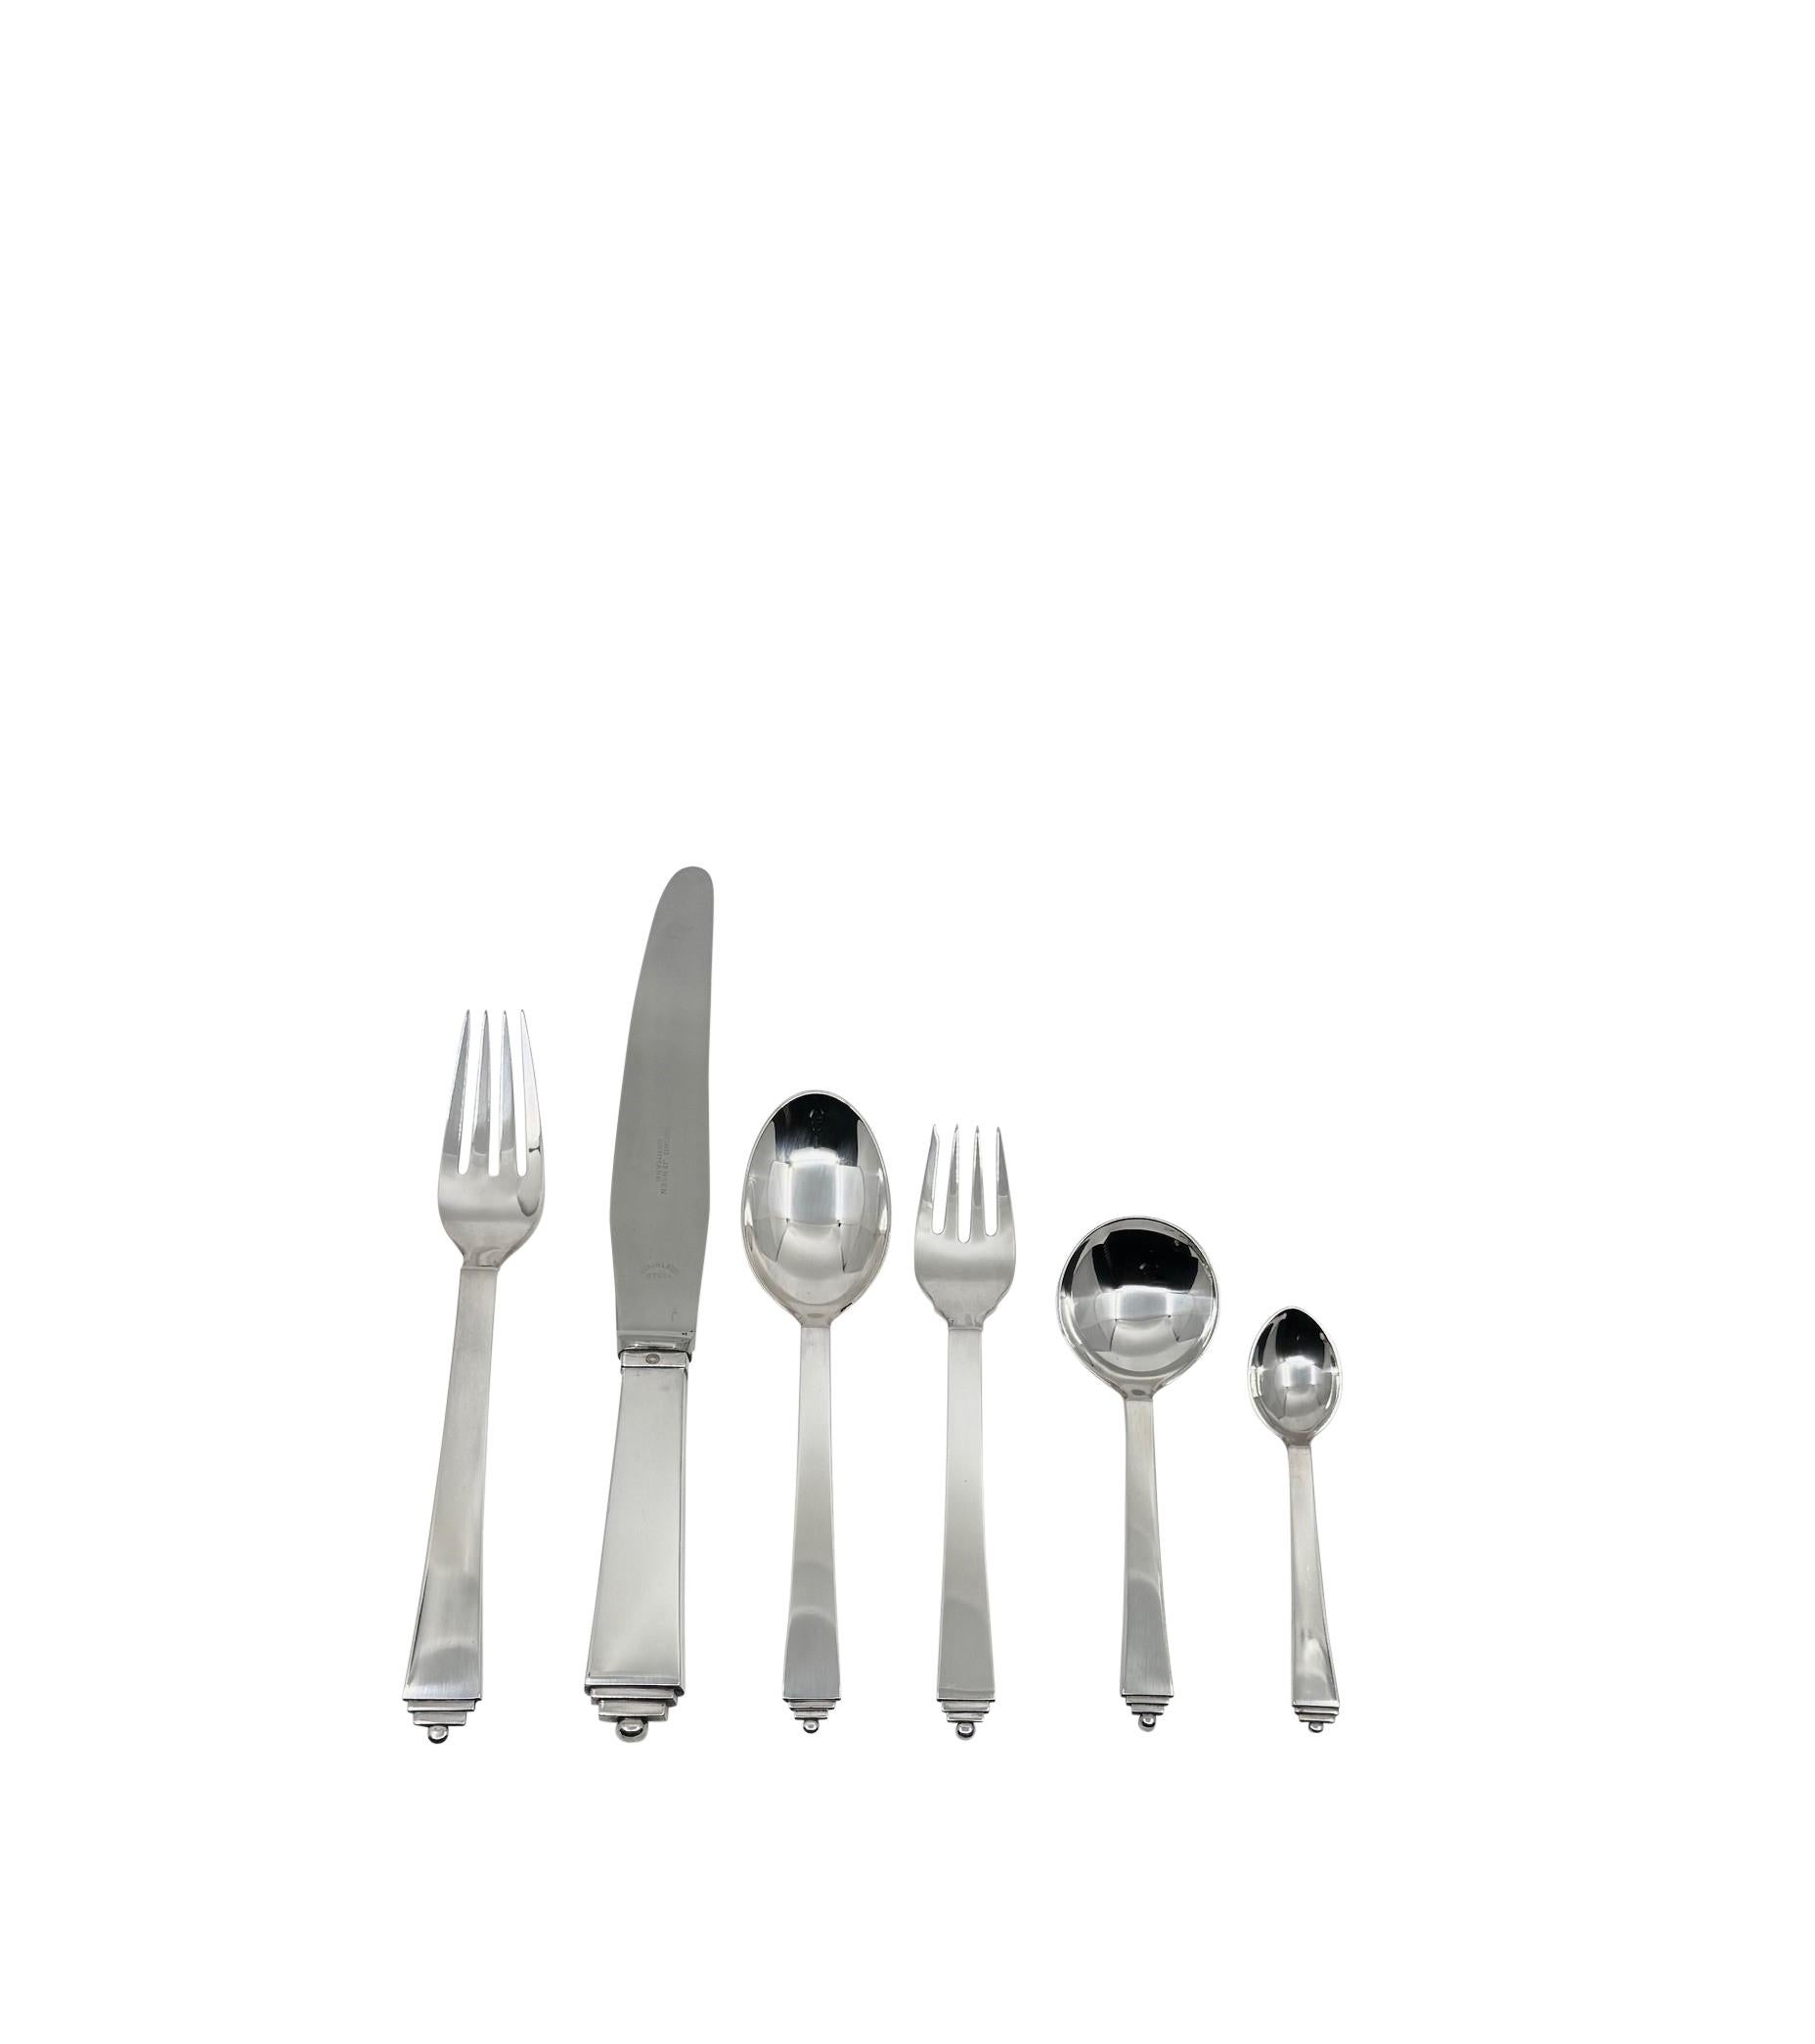 A Georg Jensen silverware service in the Pyramid pattern, designed by Harald Nielsen in 1926.  Please note this is the larger Continental size dinner knives and dinner forks. This set comprises 12 settings of 7 pieces.

The set is:

12 extra-large